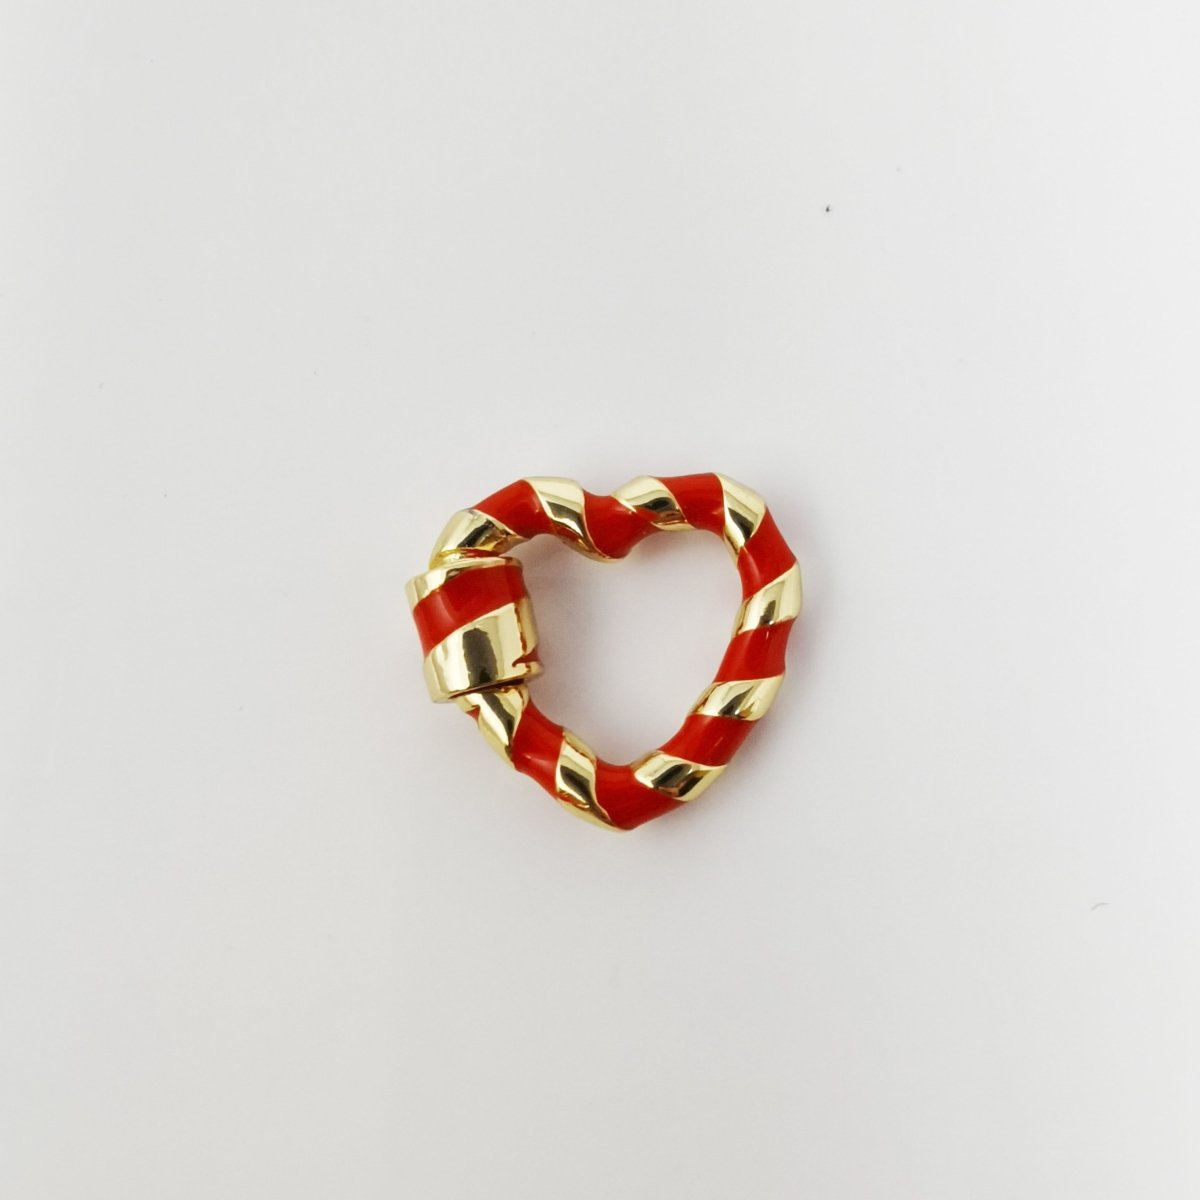 24K Gold-Plated Red and Gold Heart Carabiner, Candy Cane Swirl Design, Circle Screw Clasp - DLUXCA